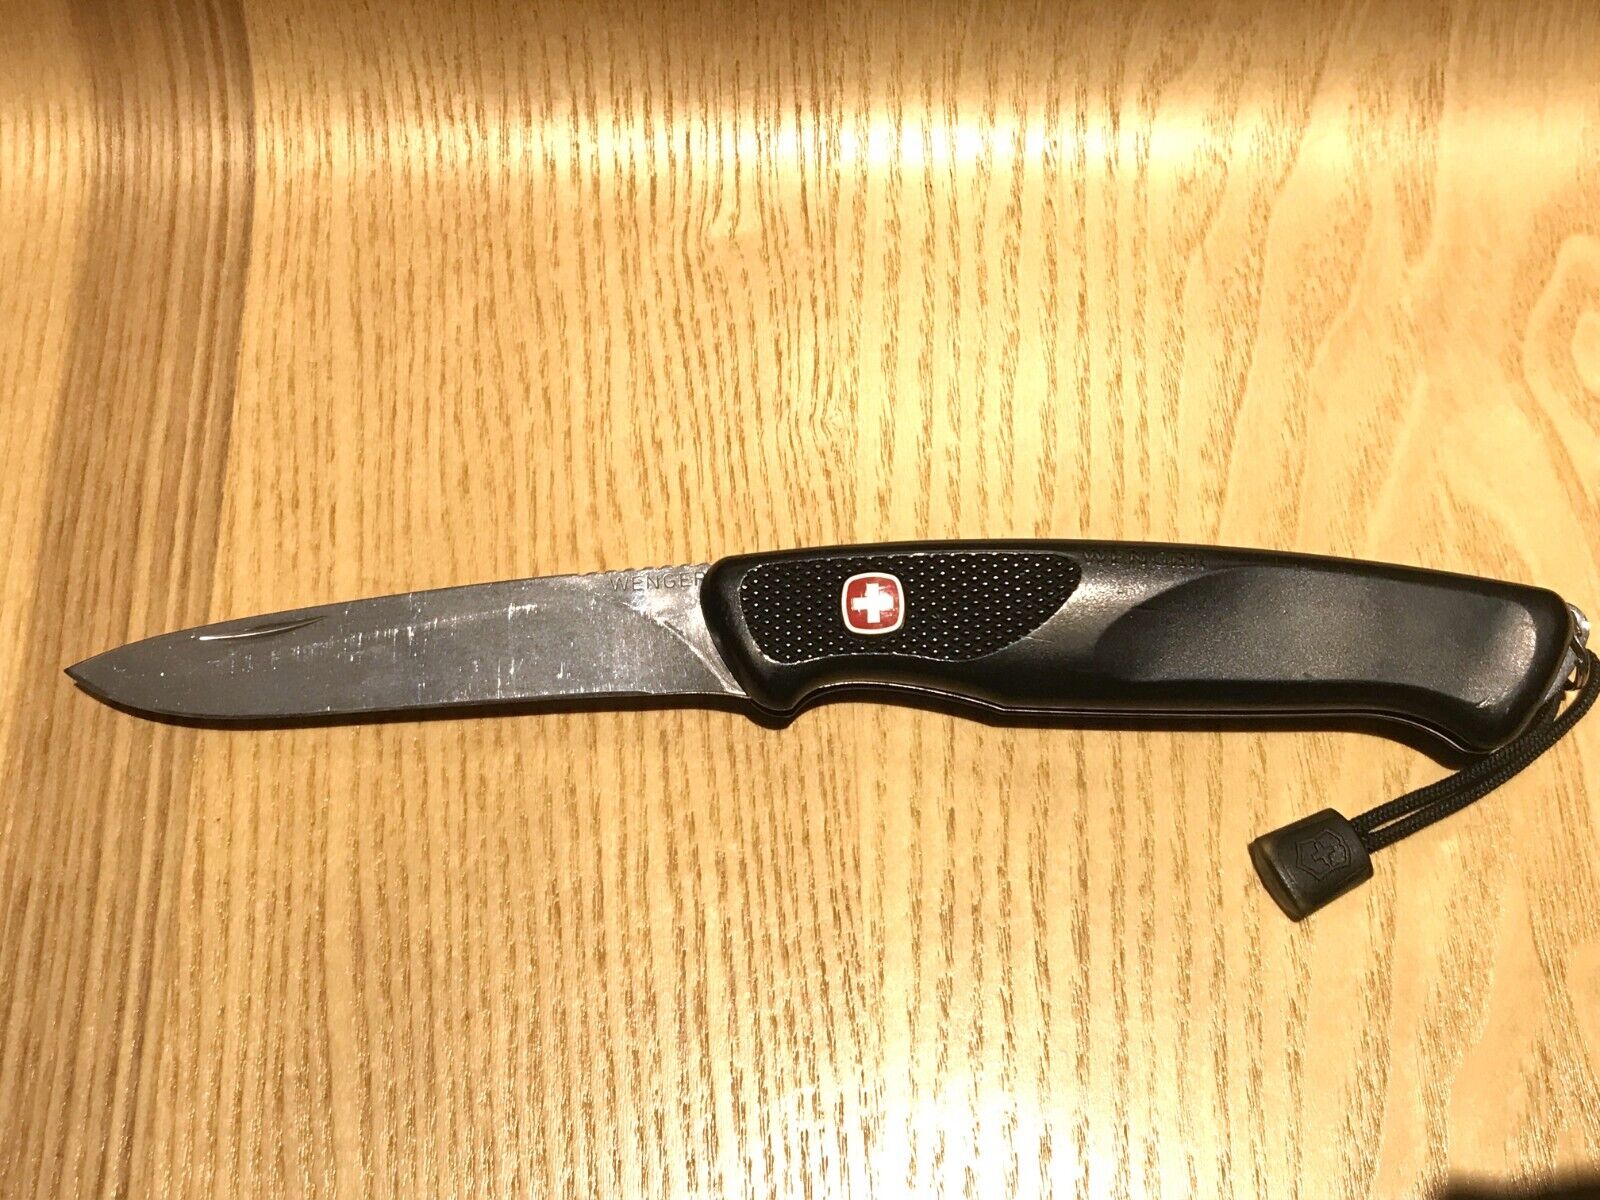 Wenger Ranger 66 Swiss Army Knife 130 mm. hard to find model 